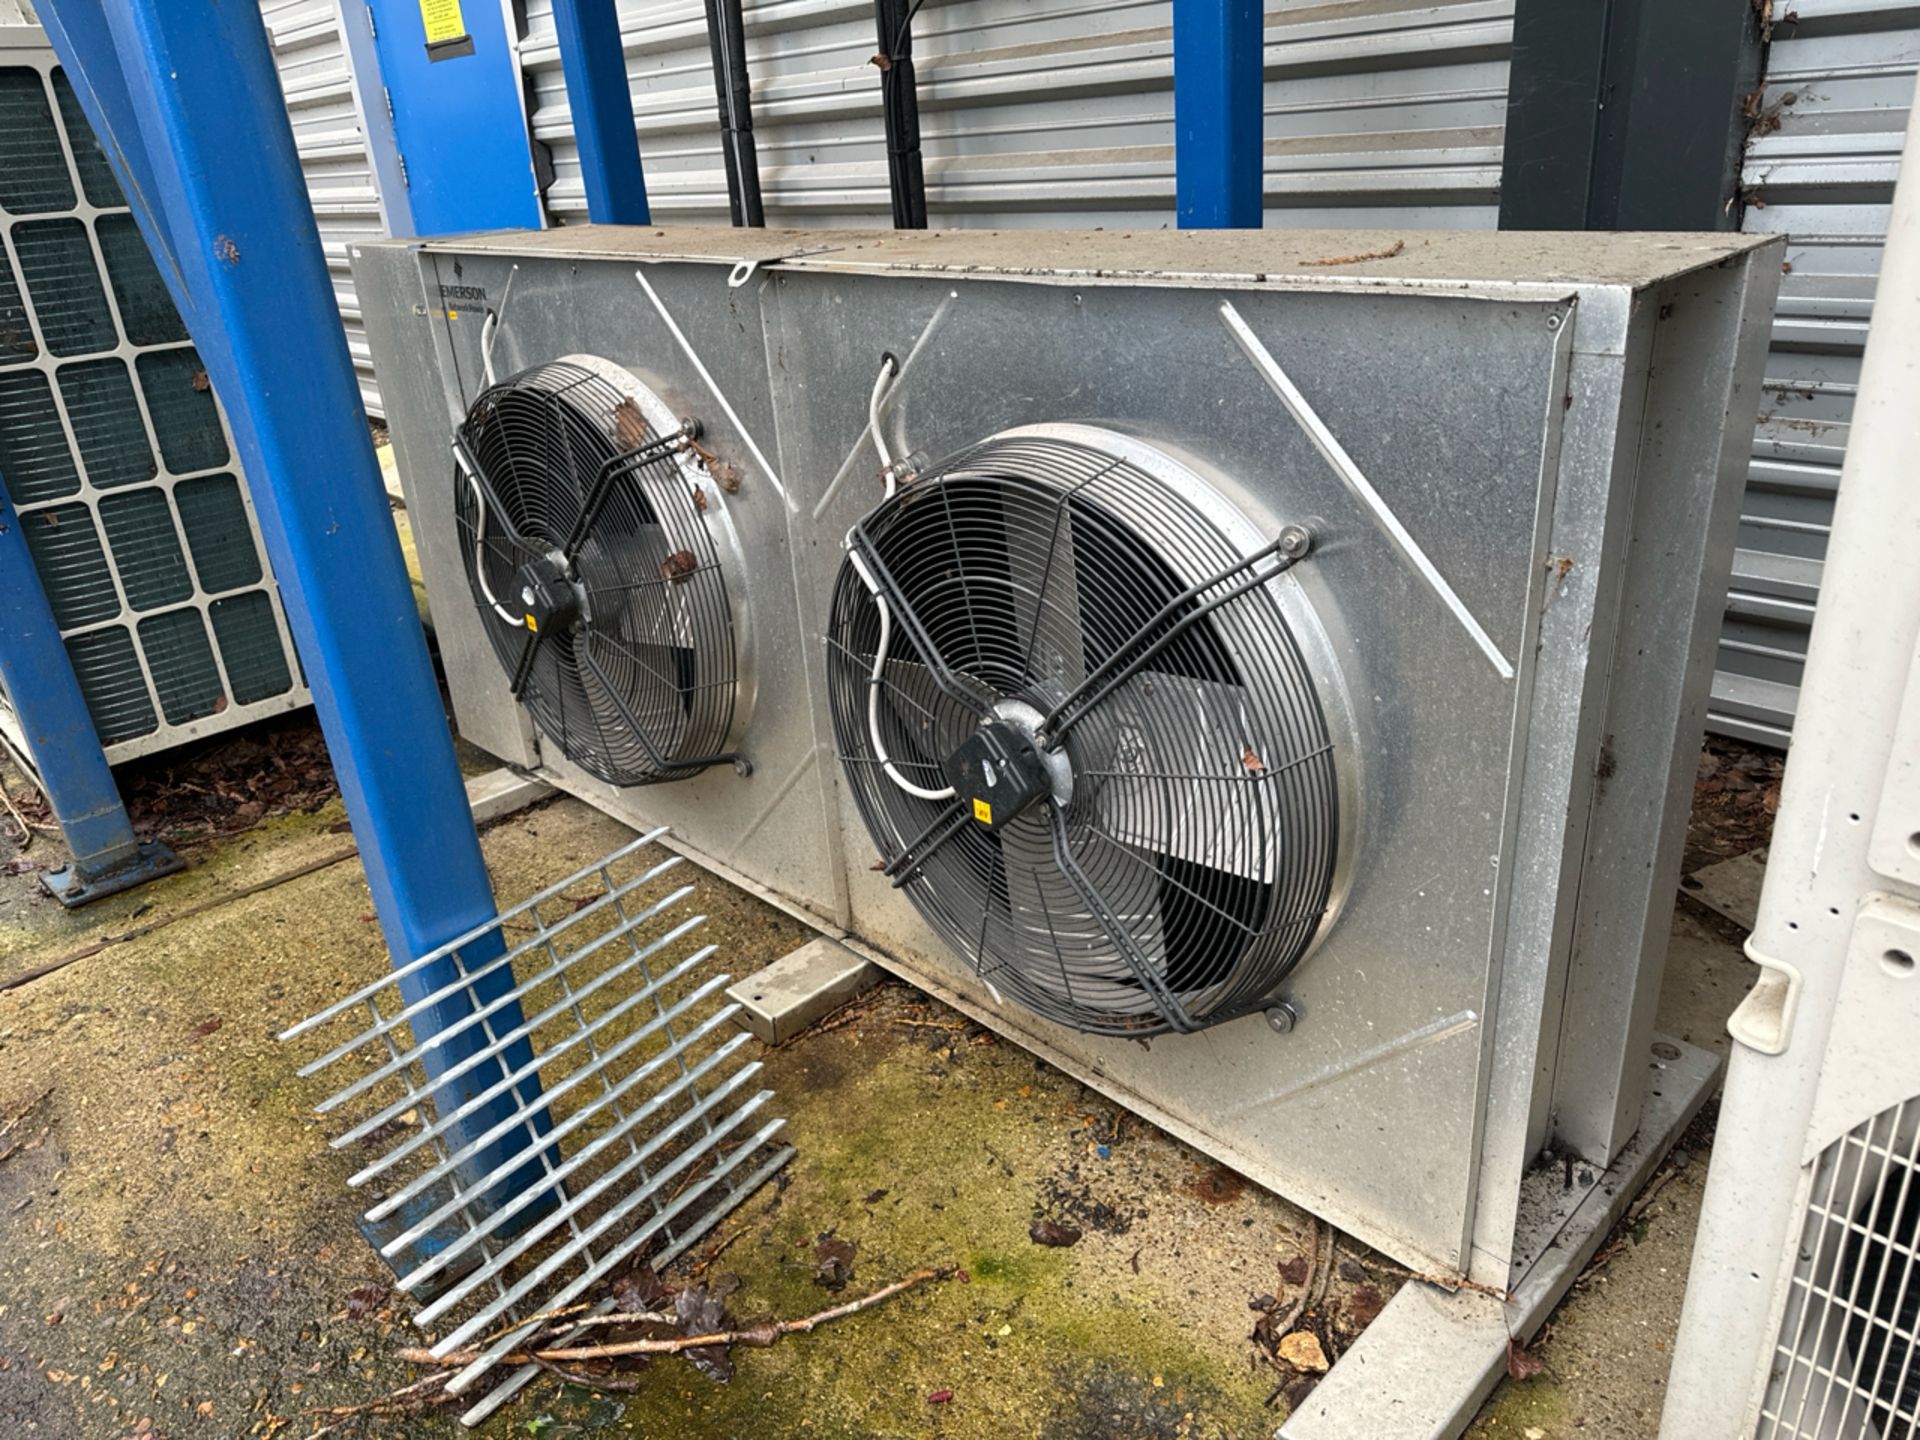 Emerson Network Power External Cooling Fans - Image 2 of 4